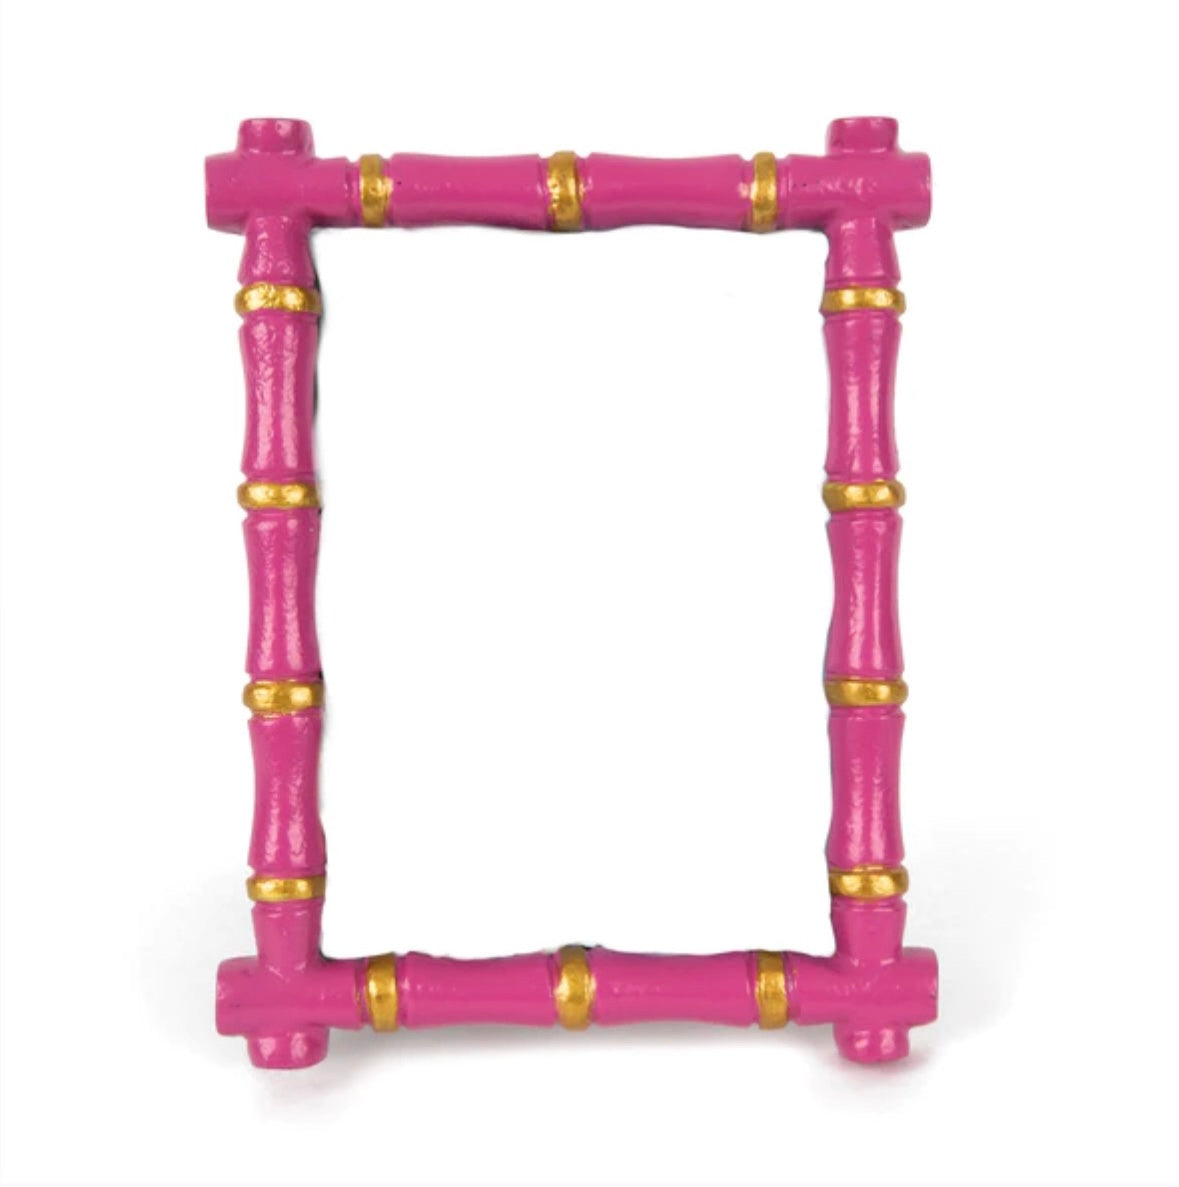 Color Block Chang Mai Frame - Pink